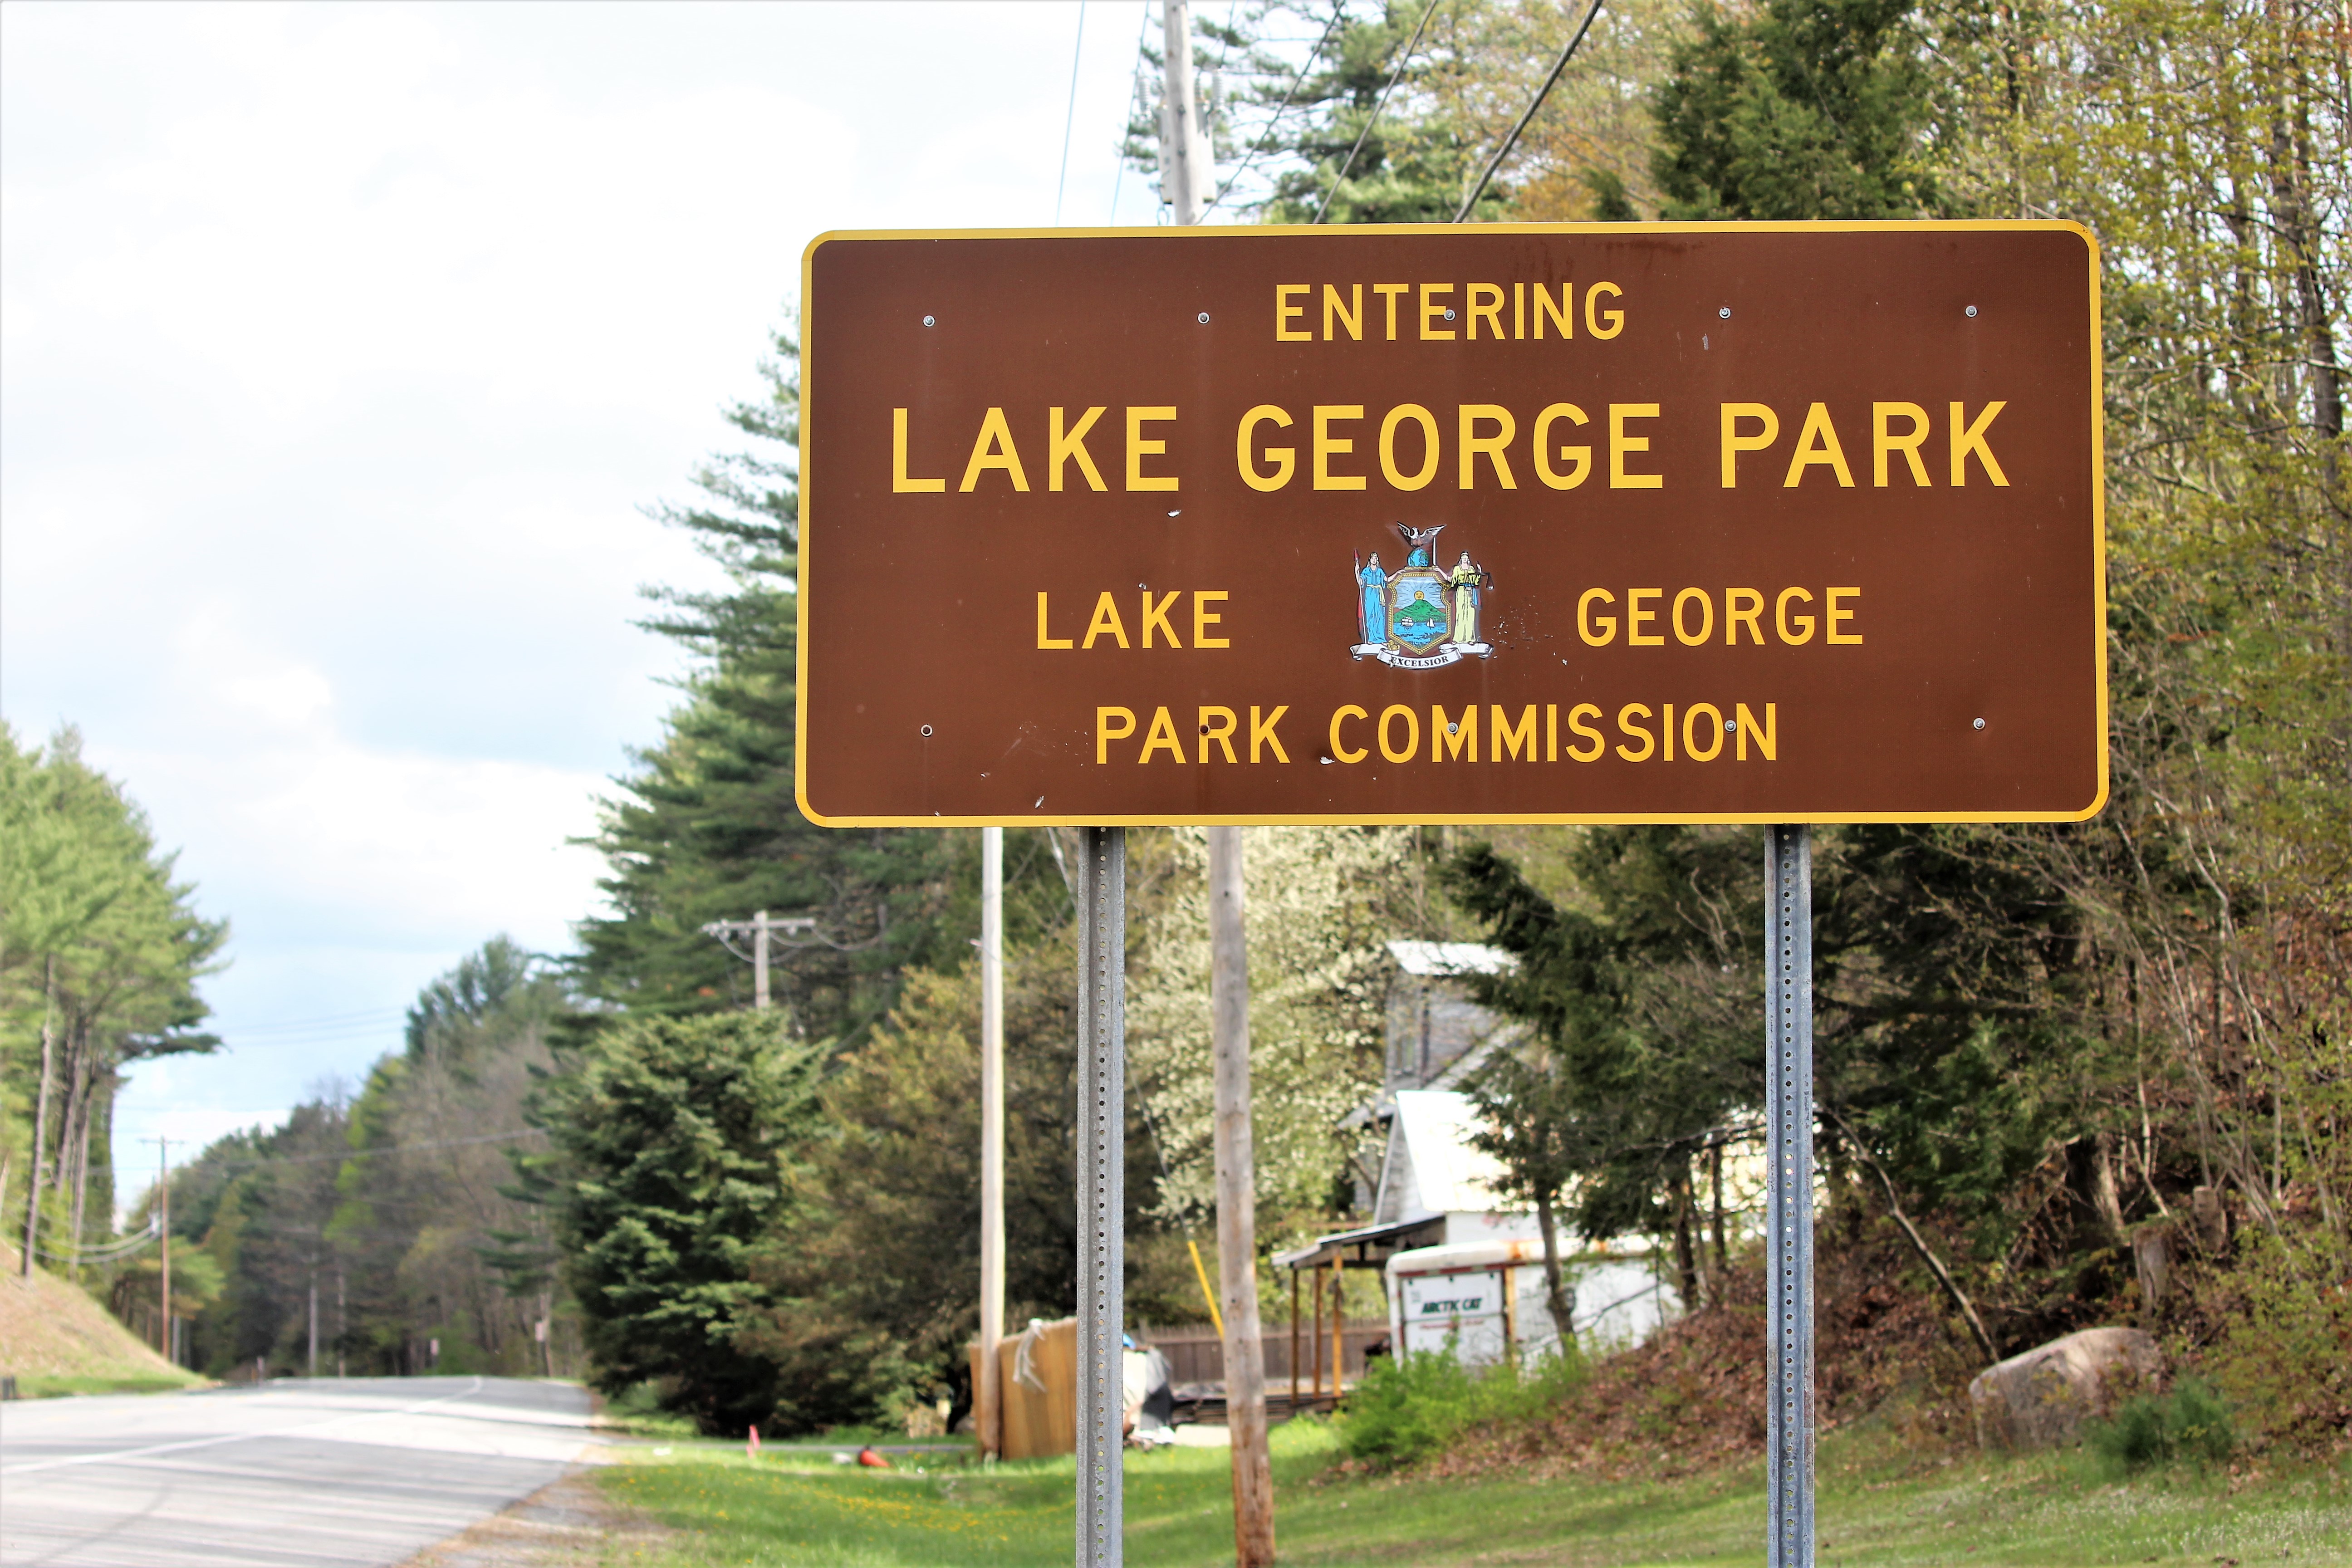 Photo of Lake George Park Commission sign by Tyler McNeil courtesy of Wikimedia commons